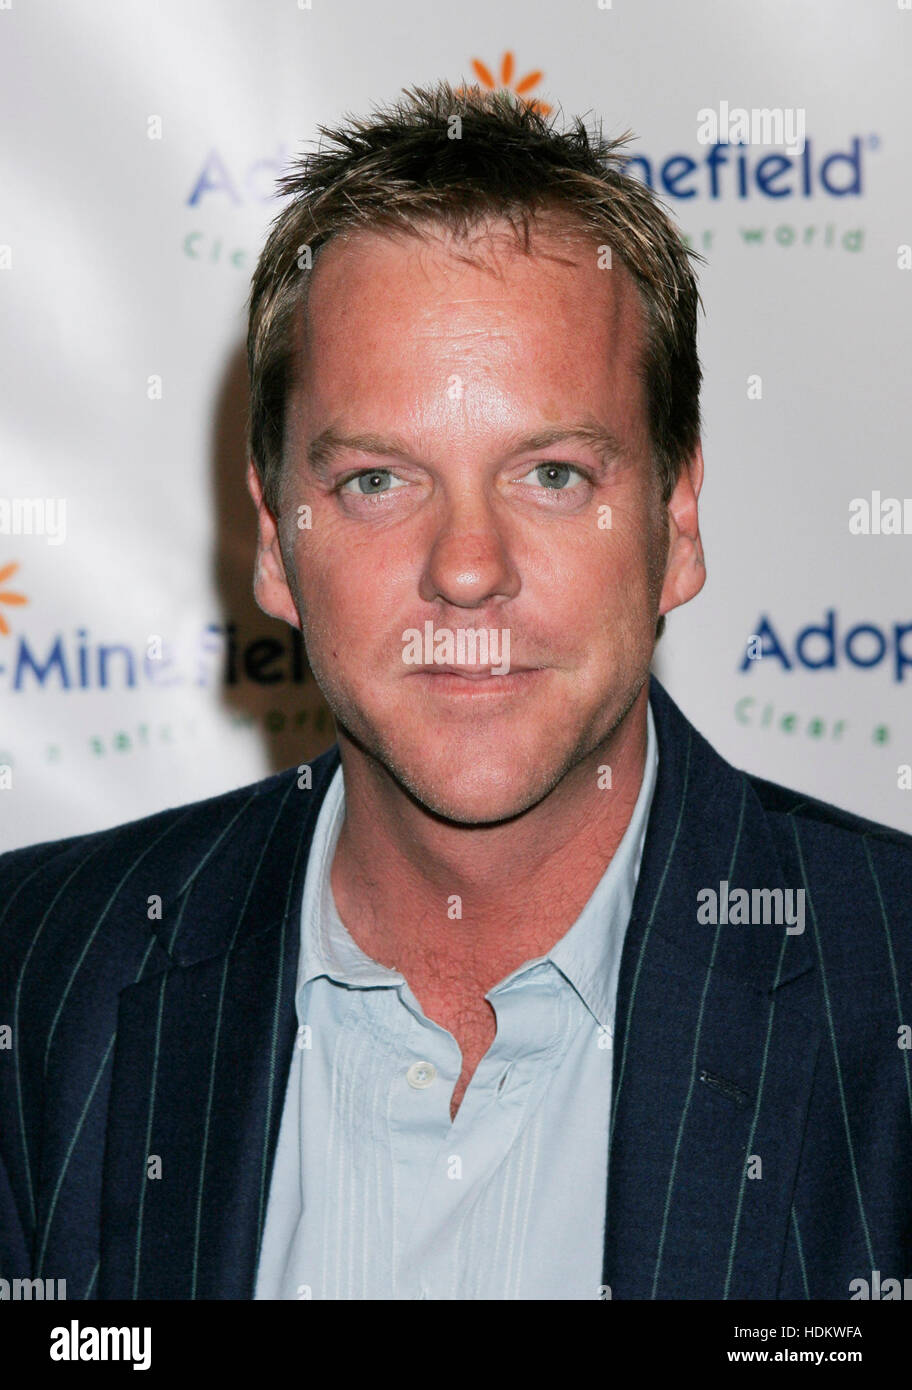 Actor Kiefer Sutherland arrives for the 4th Annual Benefit Gala for Adopt-A-Minefield at Century Plaza Hotel in Los Angeles, California on Friday 15 October, 2004. Photo credit: Francis Specker Stock Photo